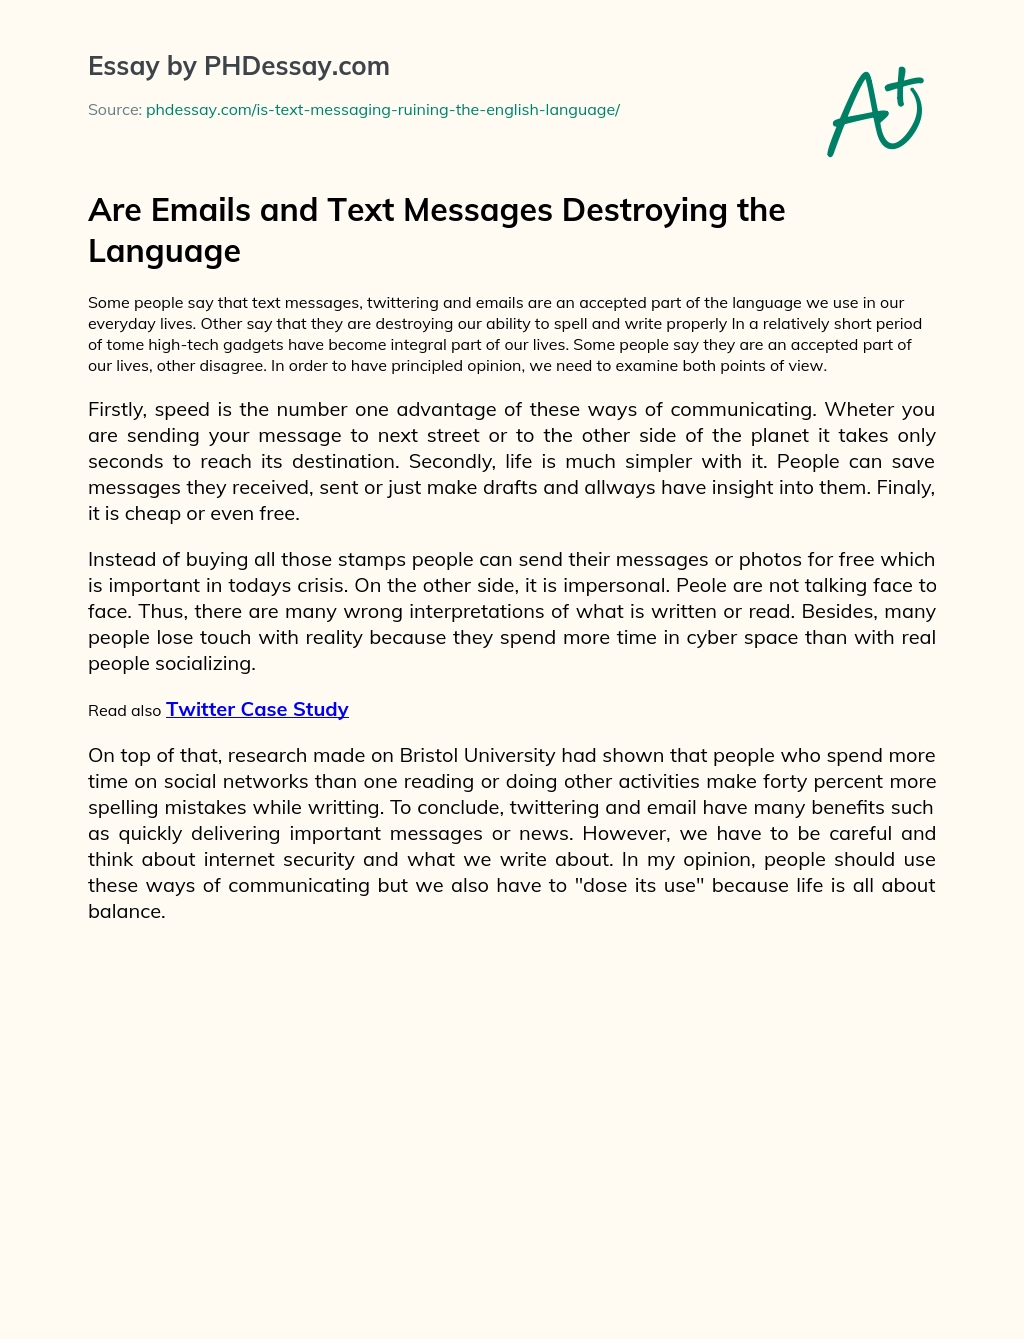 Are Emails and Text Messages Destroying the Language essay